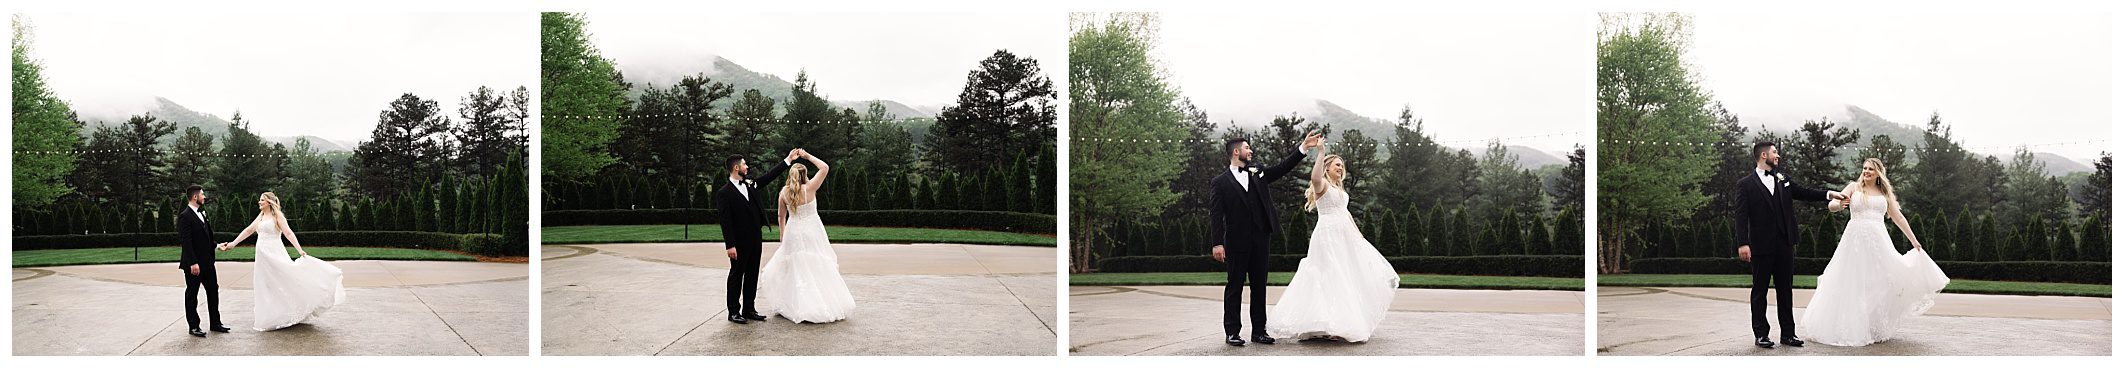 A panoramic four-part wedding photo series showing a bride and groom in an emotional first look and playful moments against a mountainous backdrop at Chestnut Ridge.